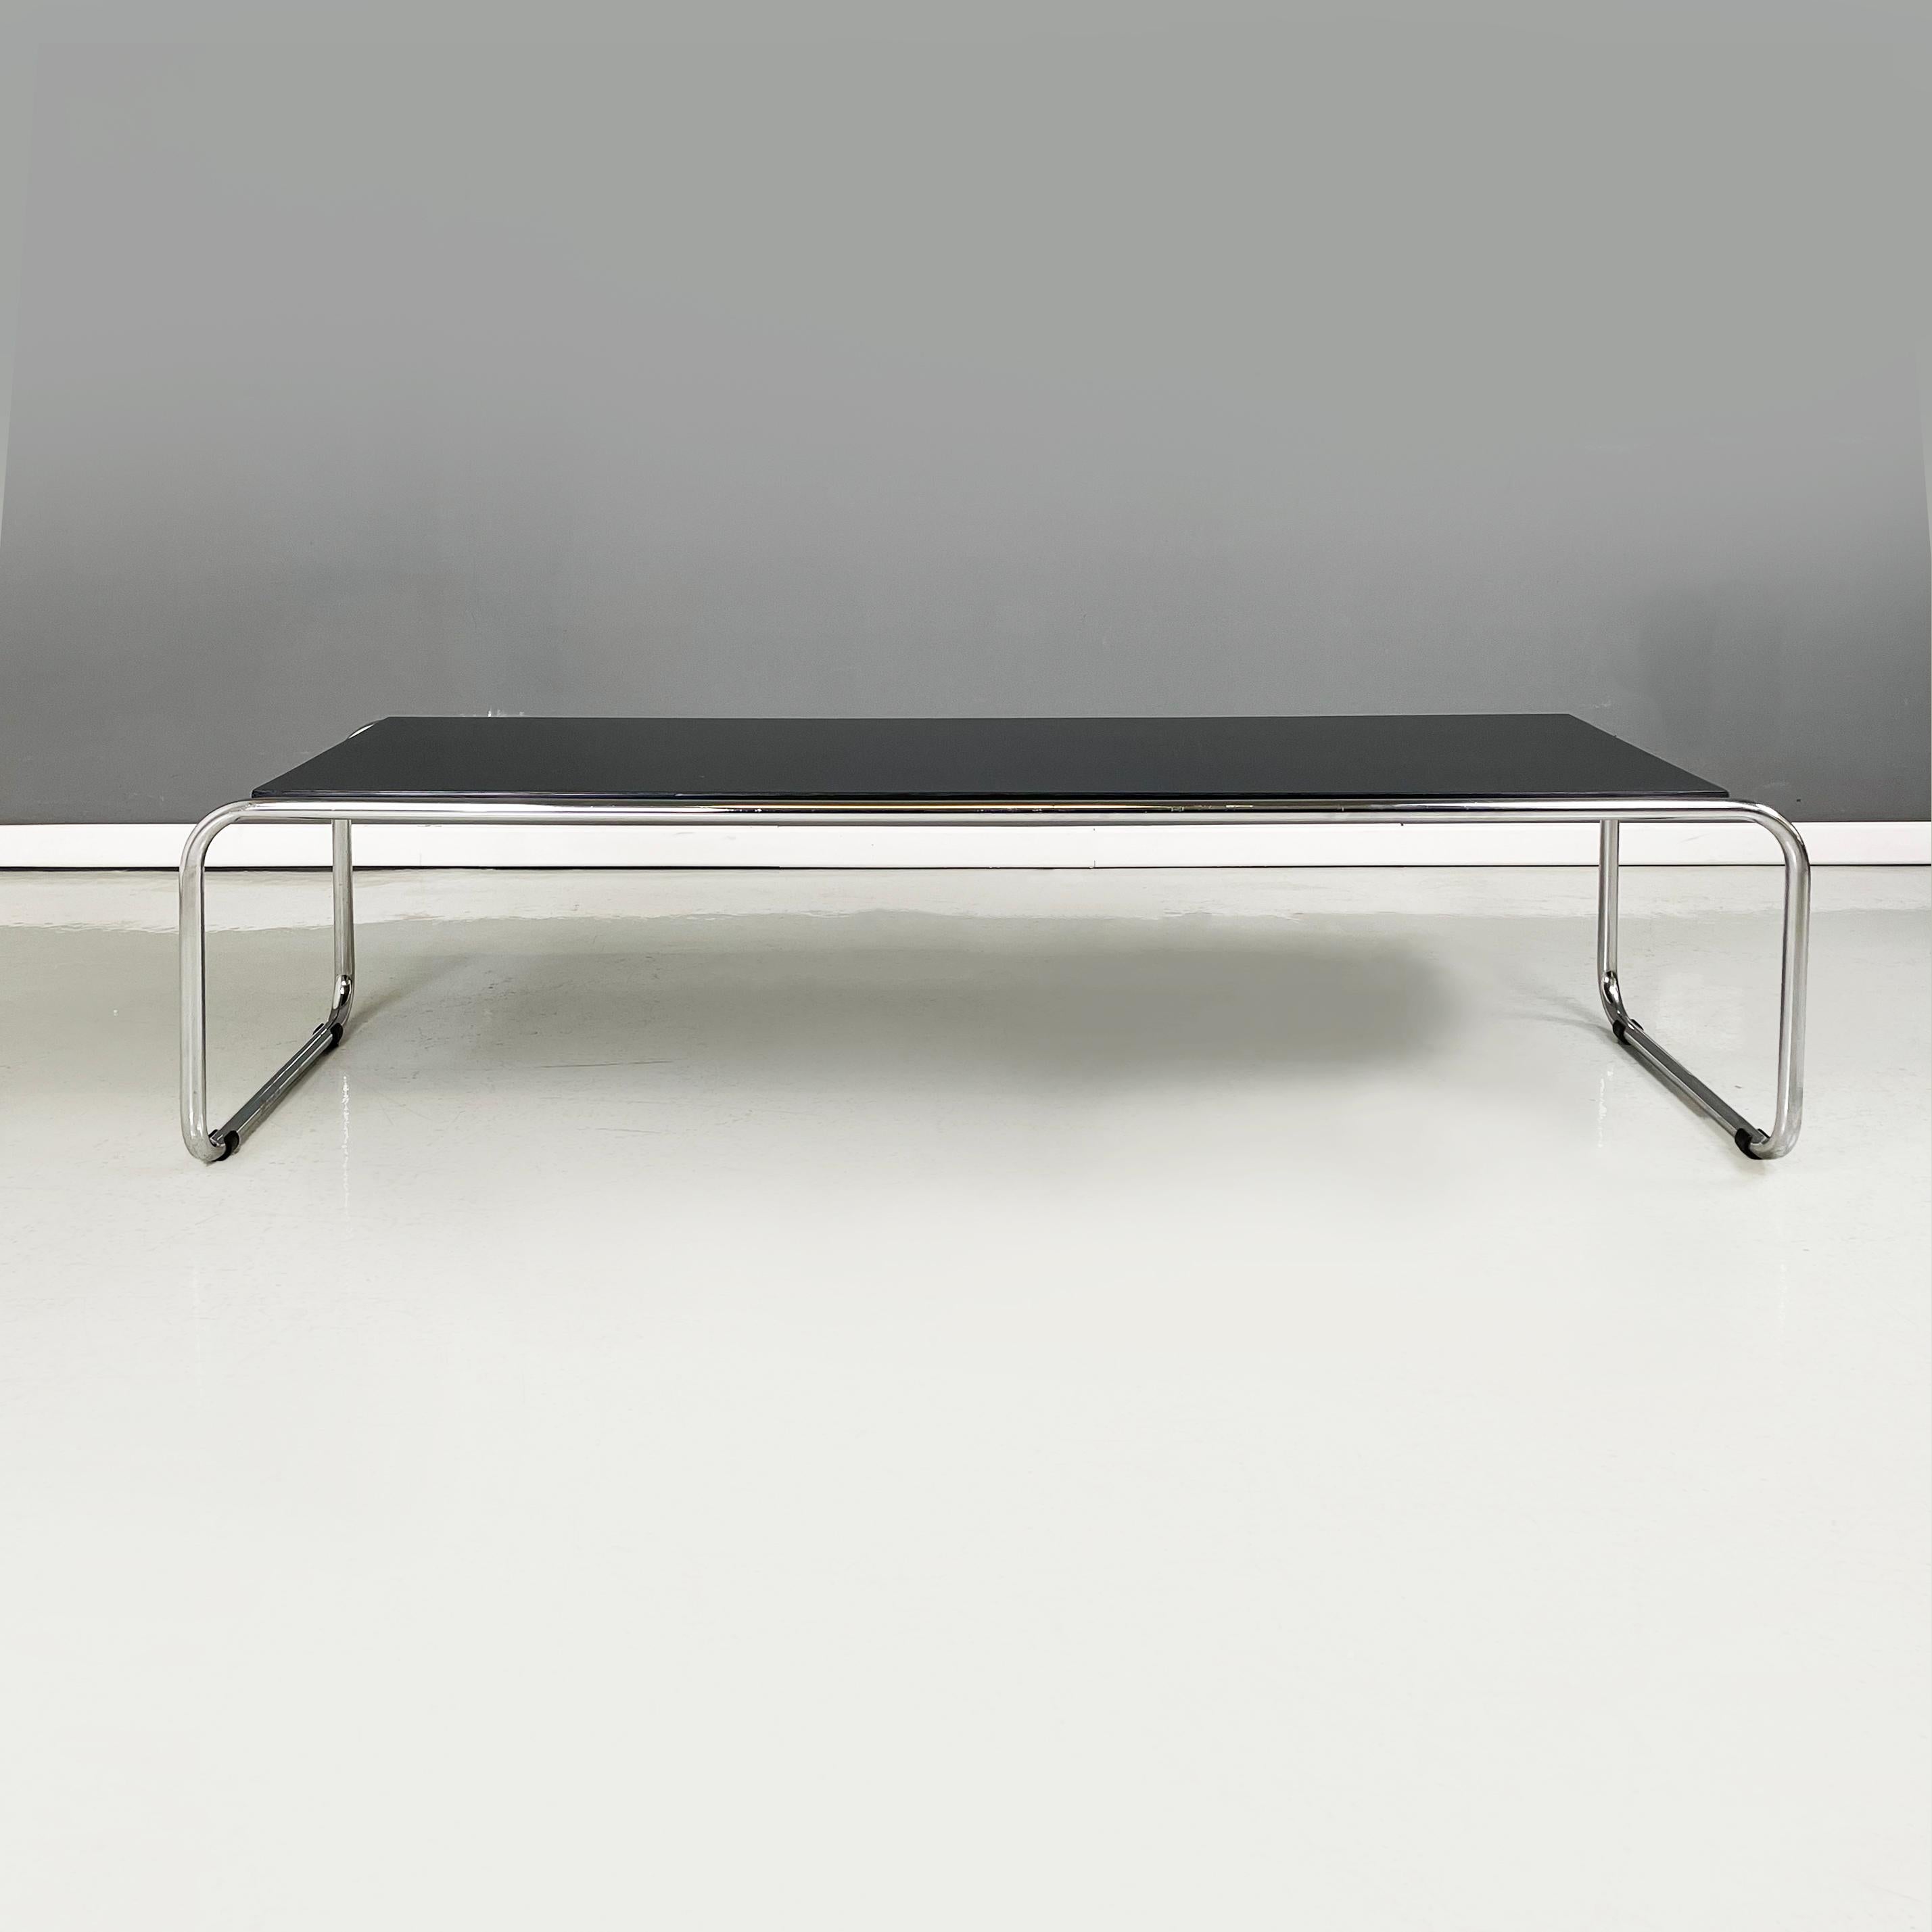 Italian modern Rectangular coffee table Laccio in black formica and steel, 1980s
Coffee table Laccio with rectangular top in black lacquered Formica. Chromed tubular steel structure.
1980s
Good condition, it has signs of oxidation on the top.